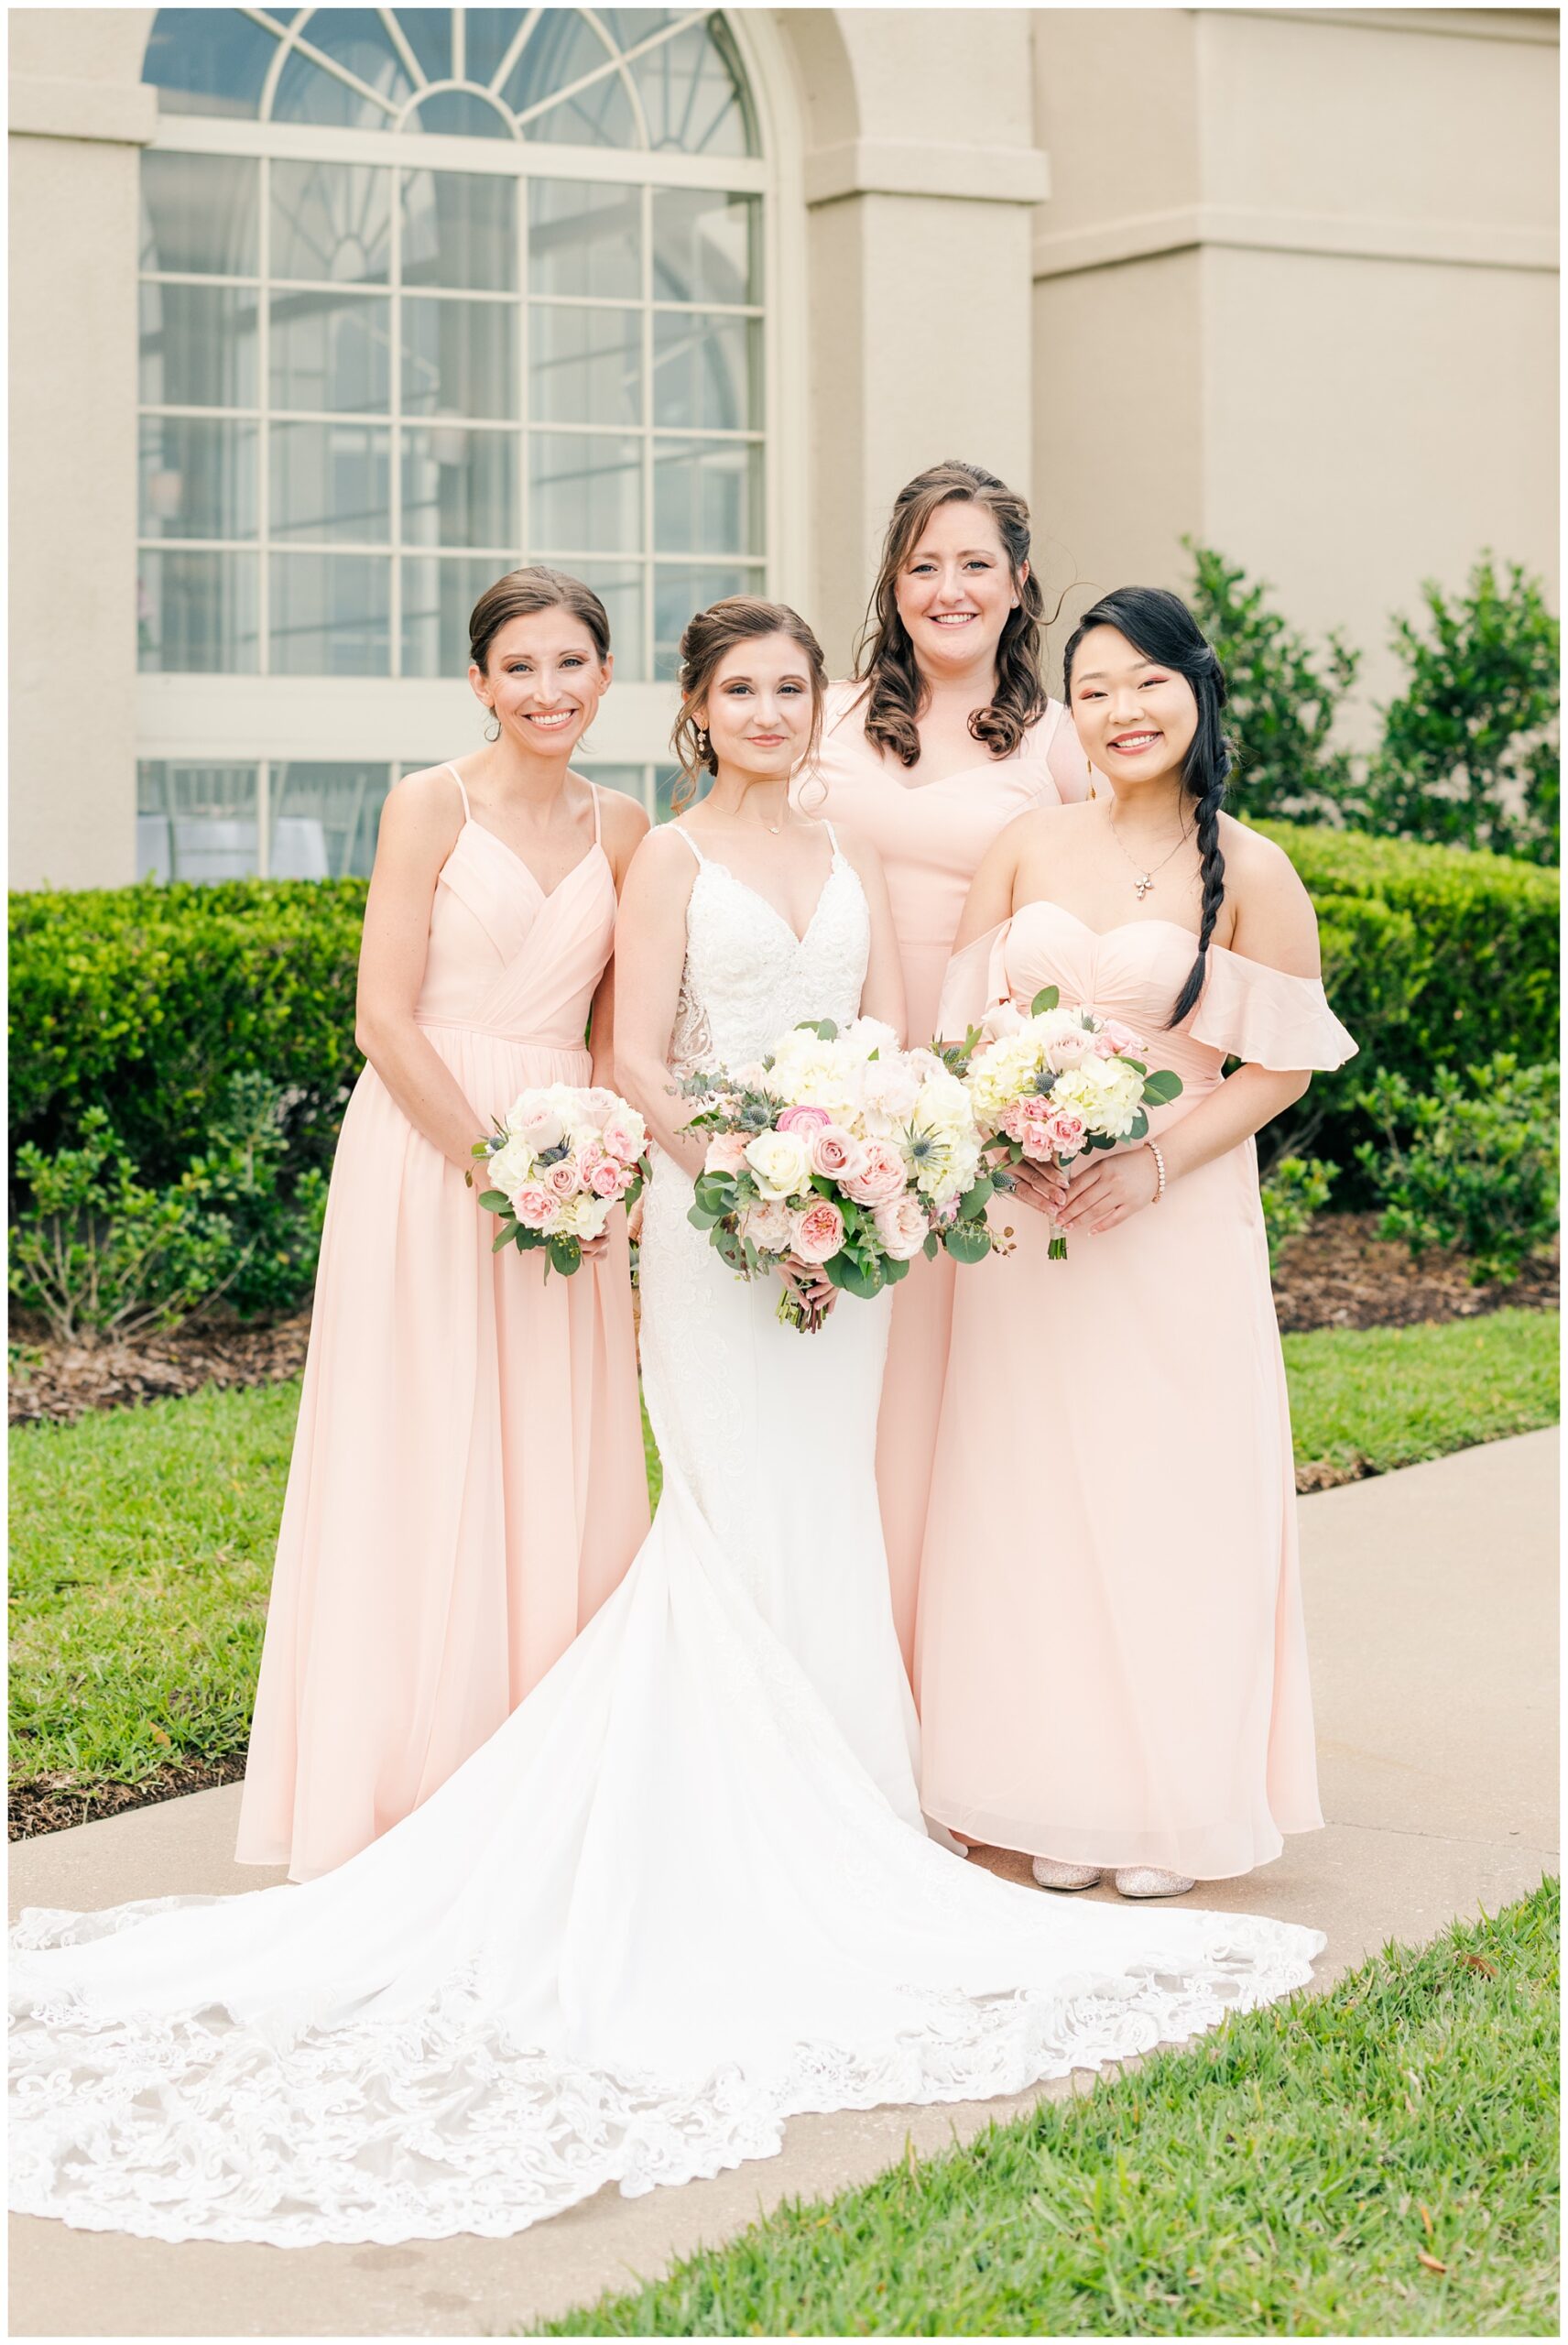 Bride and Bridesmaids at Bentwater Yacht Club.